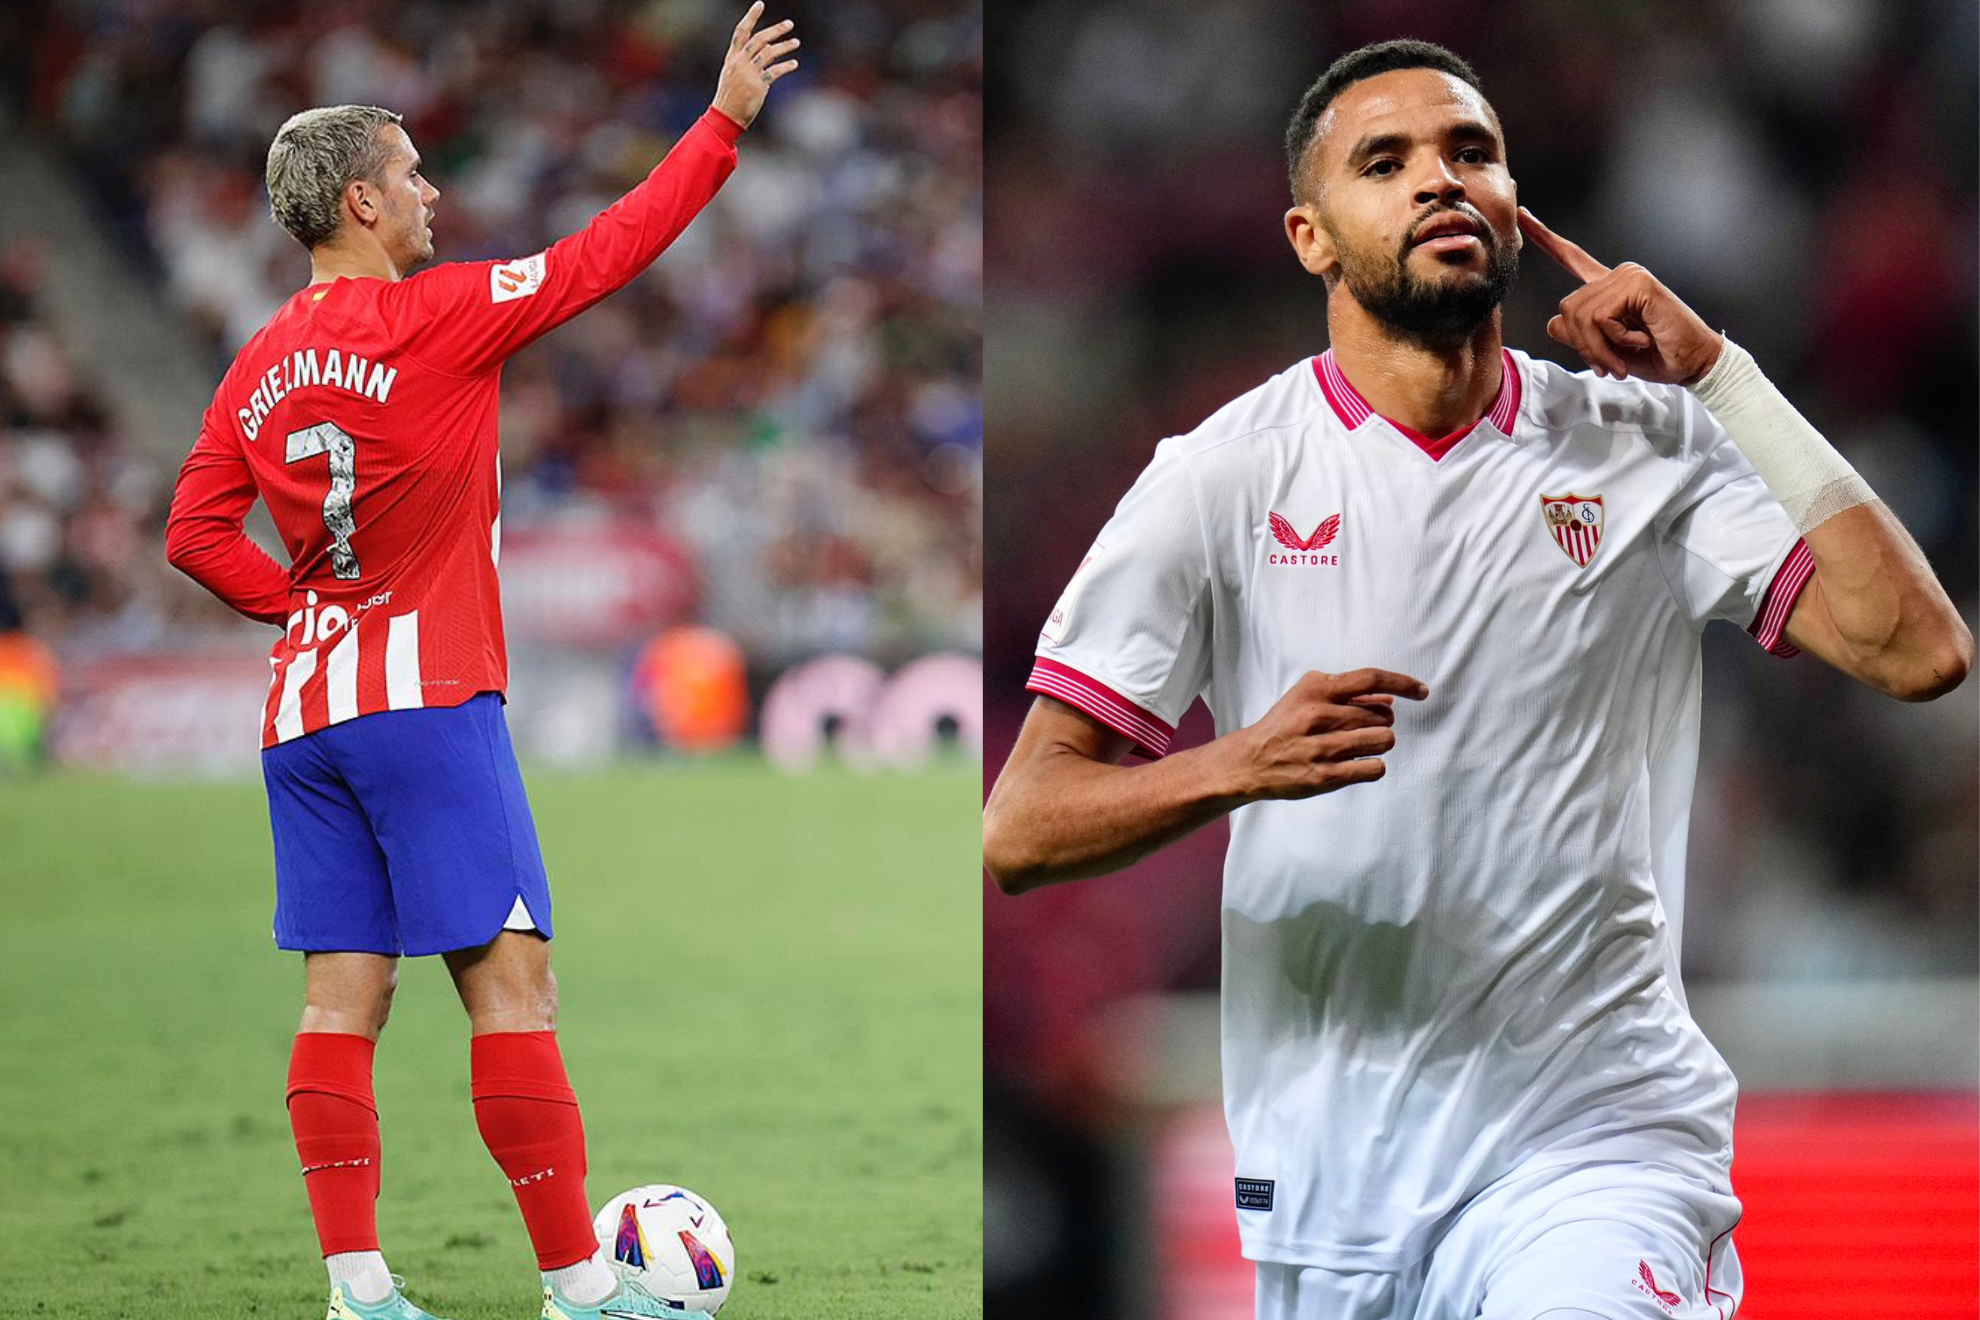 Griezmann and Atletico face En-Nesyri and Sevilla - follow the action right here.